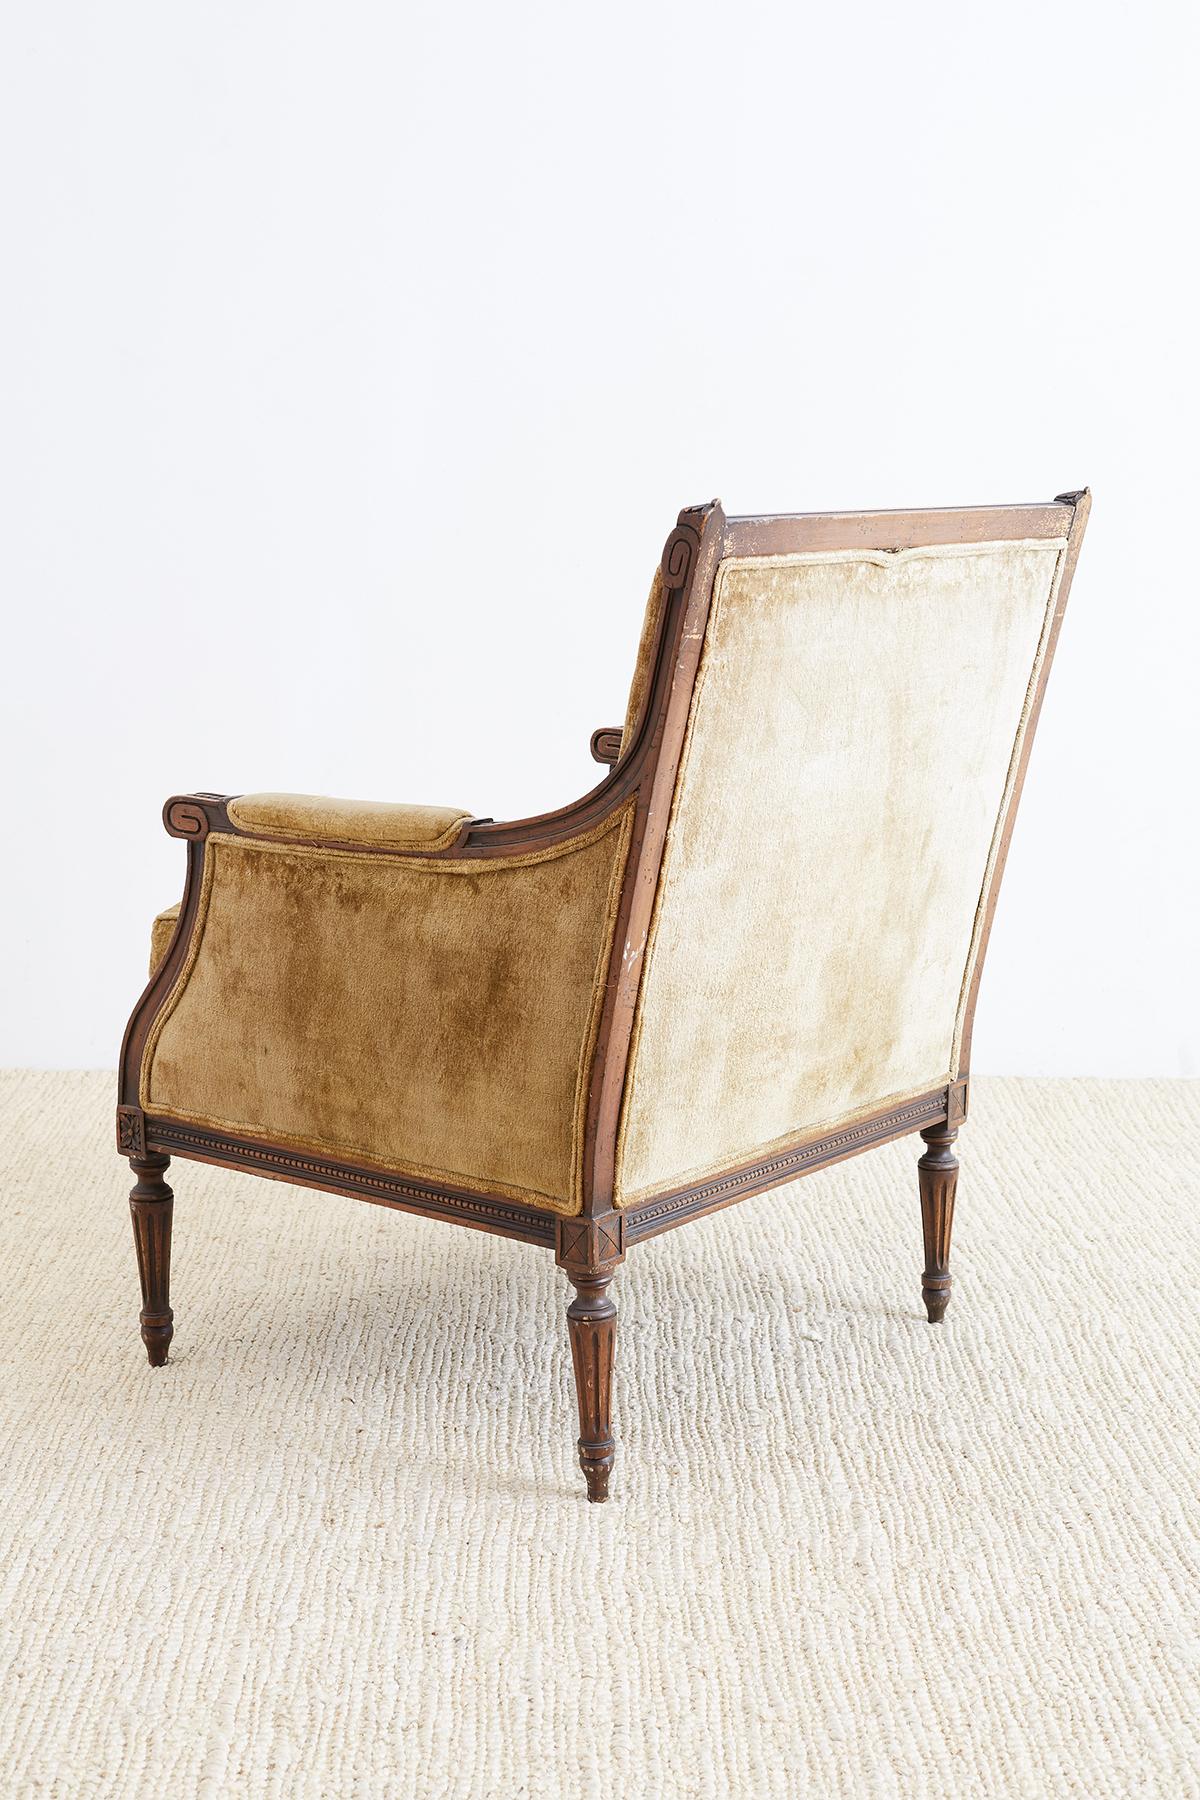 Hand-Carved 19th Century Louis XVI Marquise Bergère Armchair